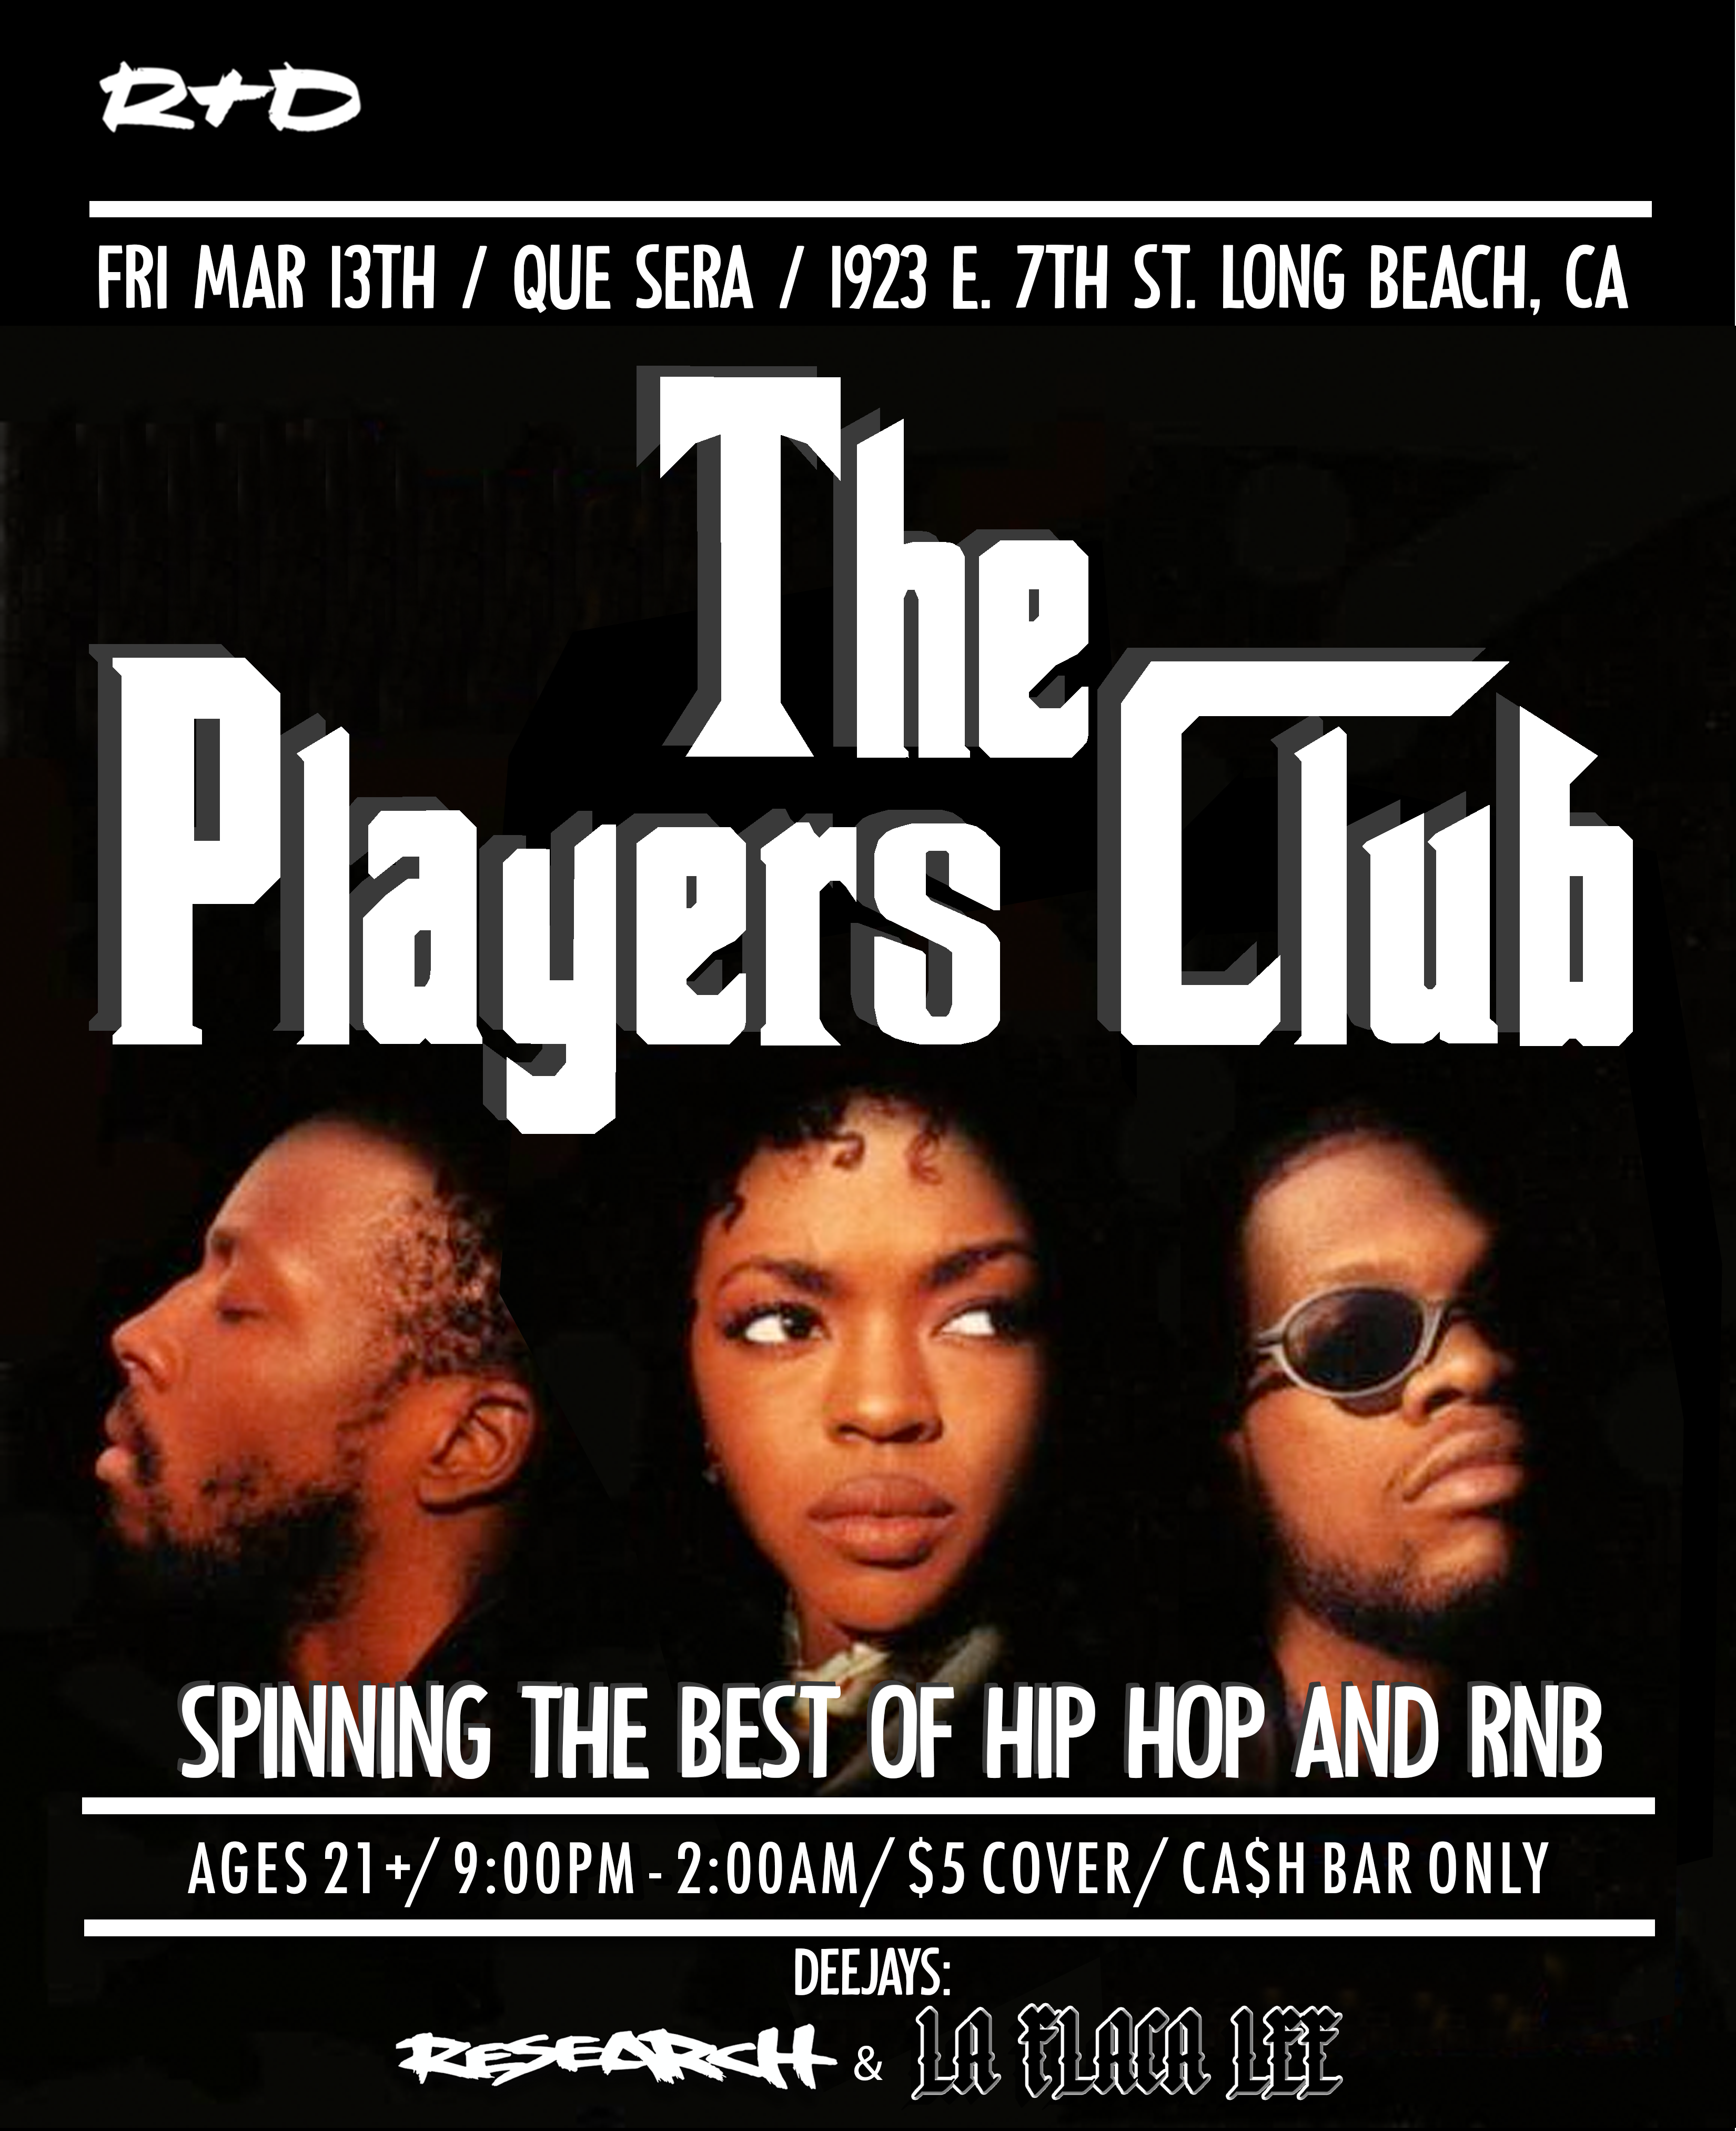 Players Club - Early 2000s / 90s RnB & Hip Hop Party in Long Beach Party!